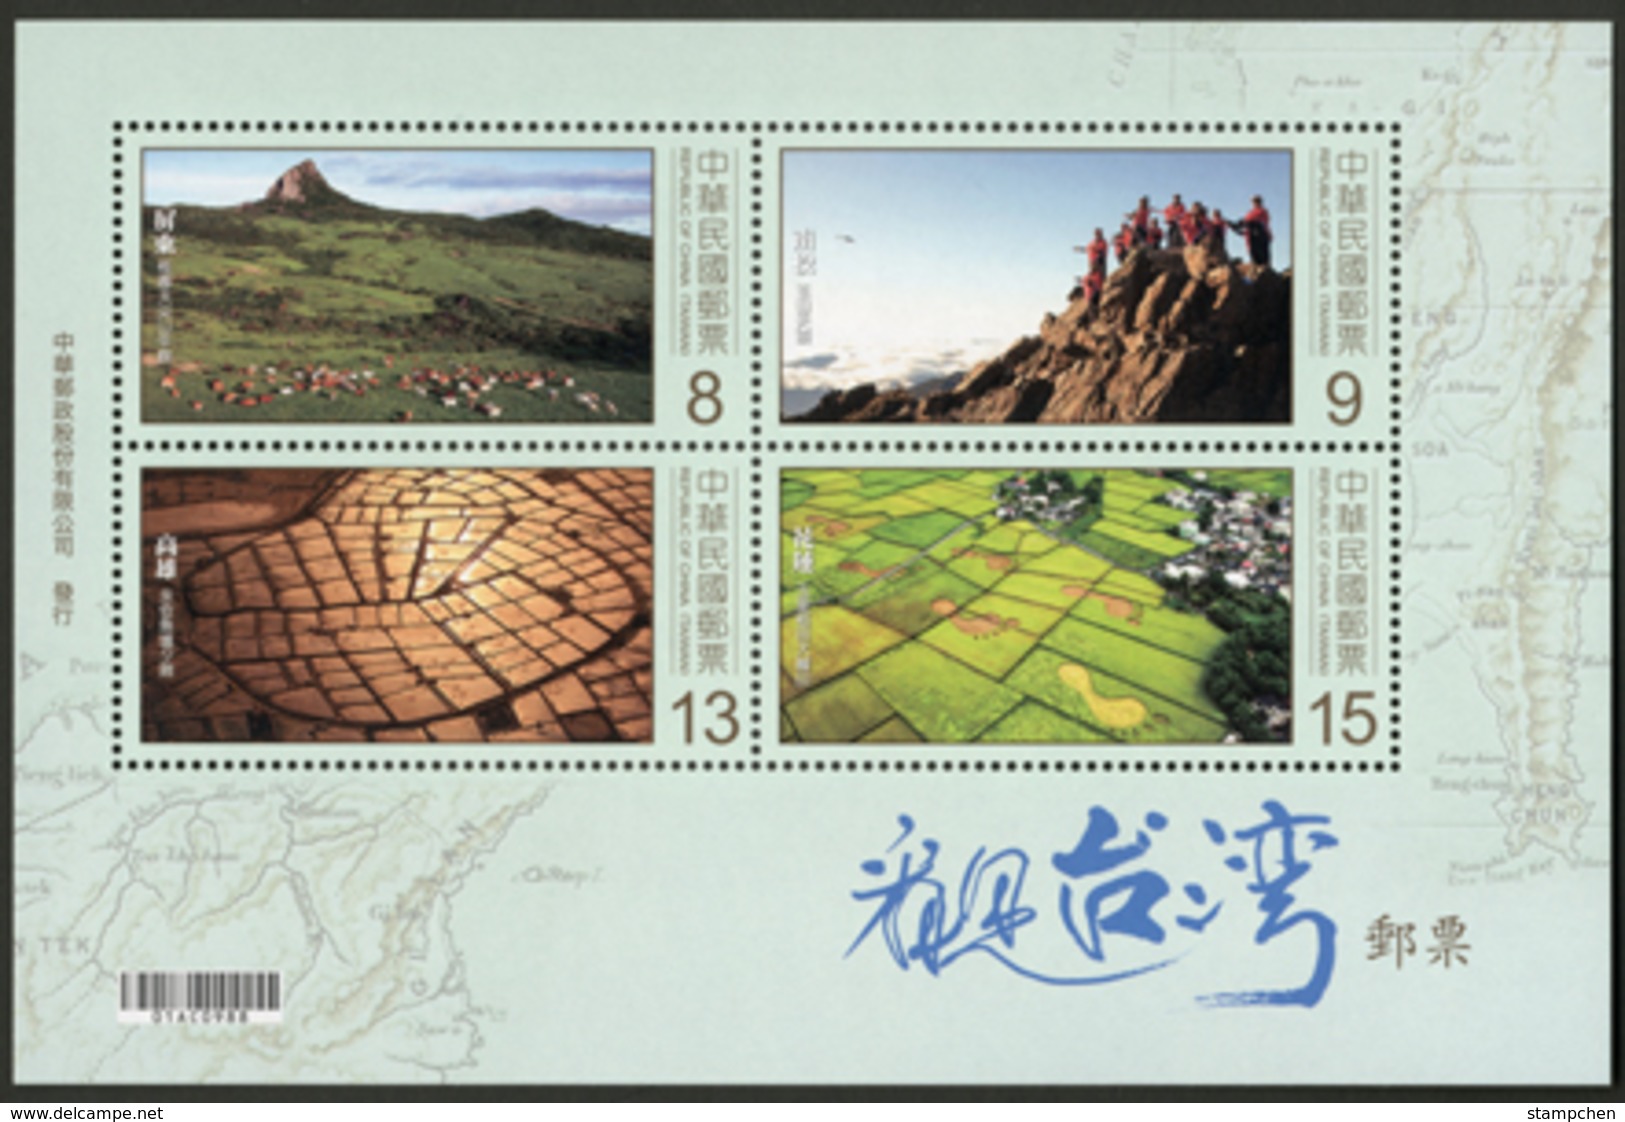 2018 Taiwan From The Air Stamps S/s Cattle Cow Mount Fish Paddy Field Farm Map Helicopter - Landbouw